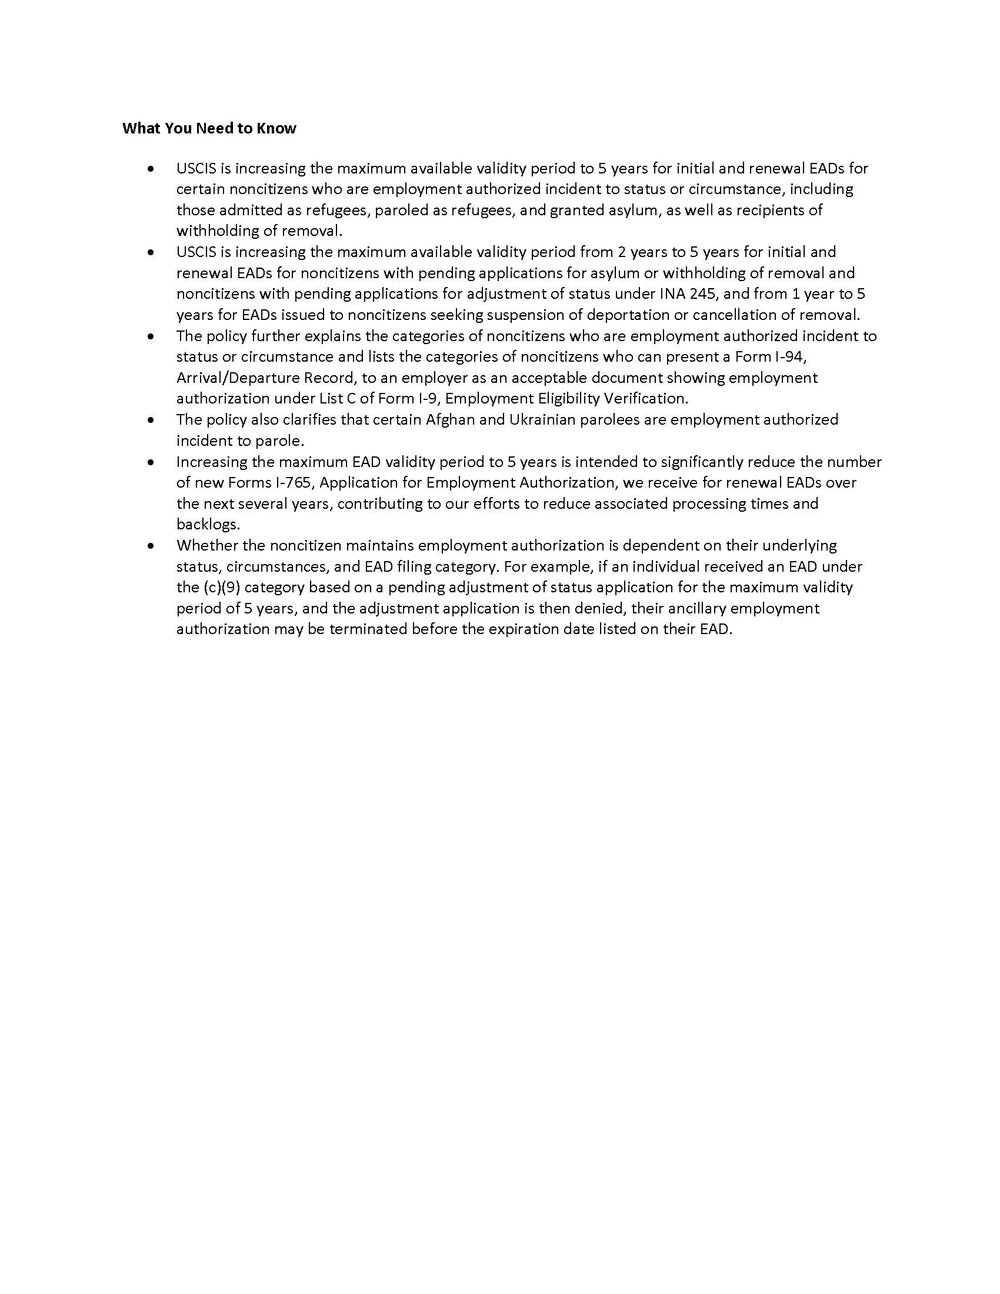 USCIS Increases Employment Authorization Document Validity Period for Certain Categories_Page_2.jpg